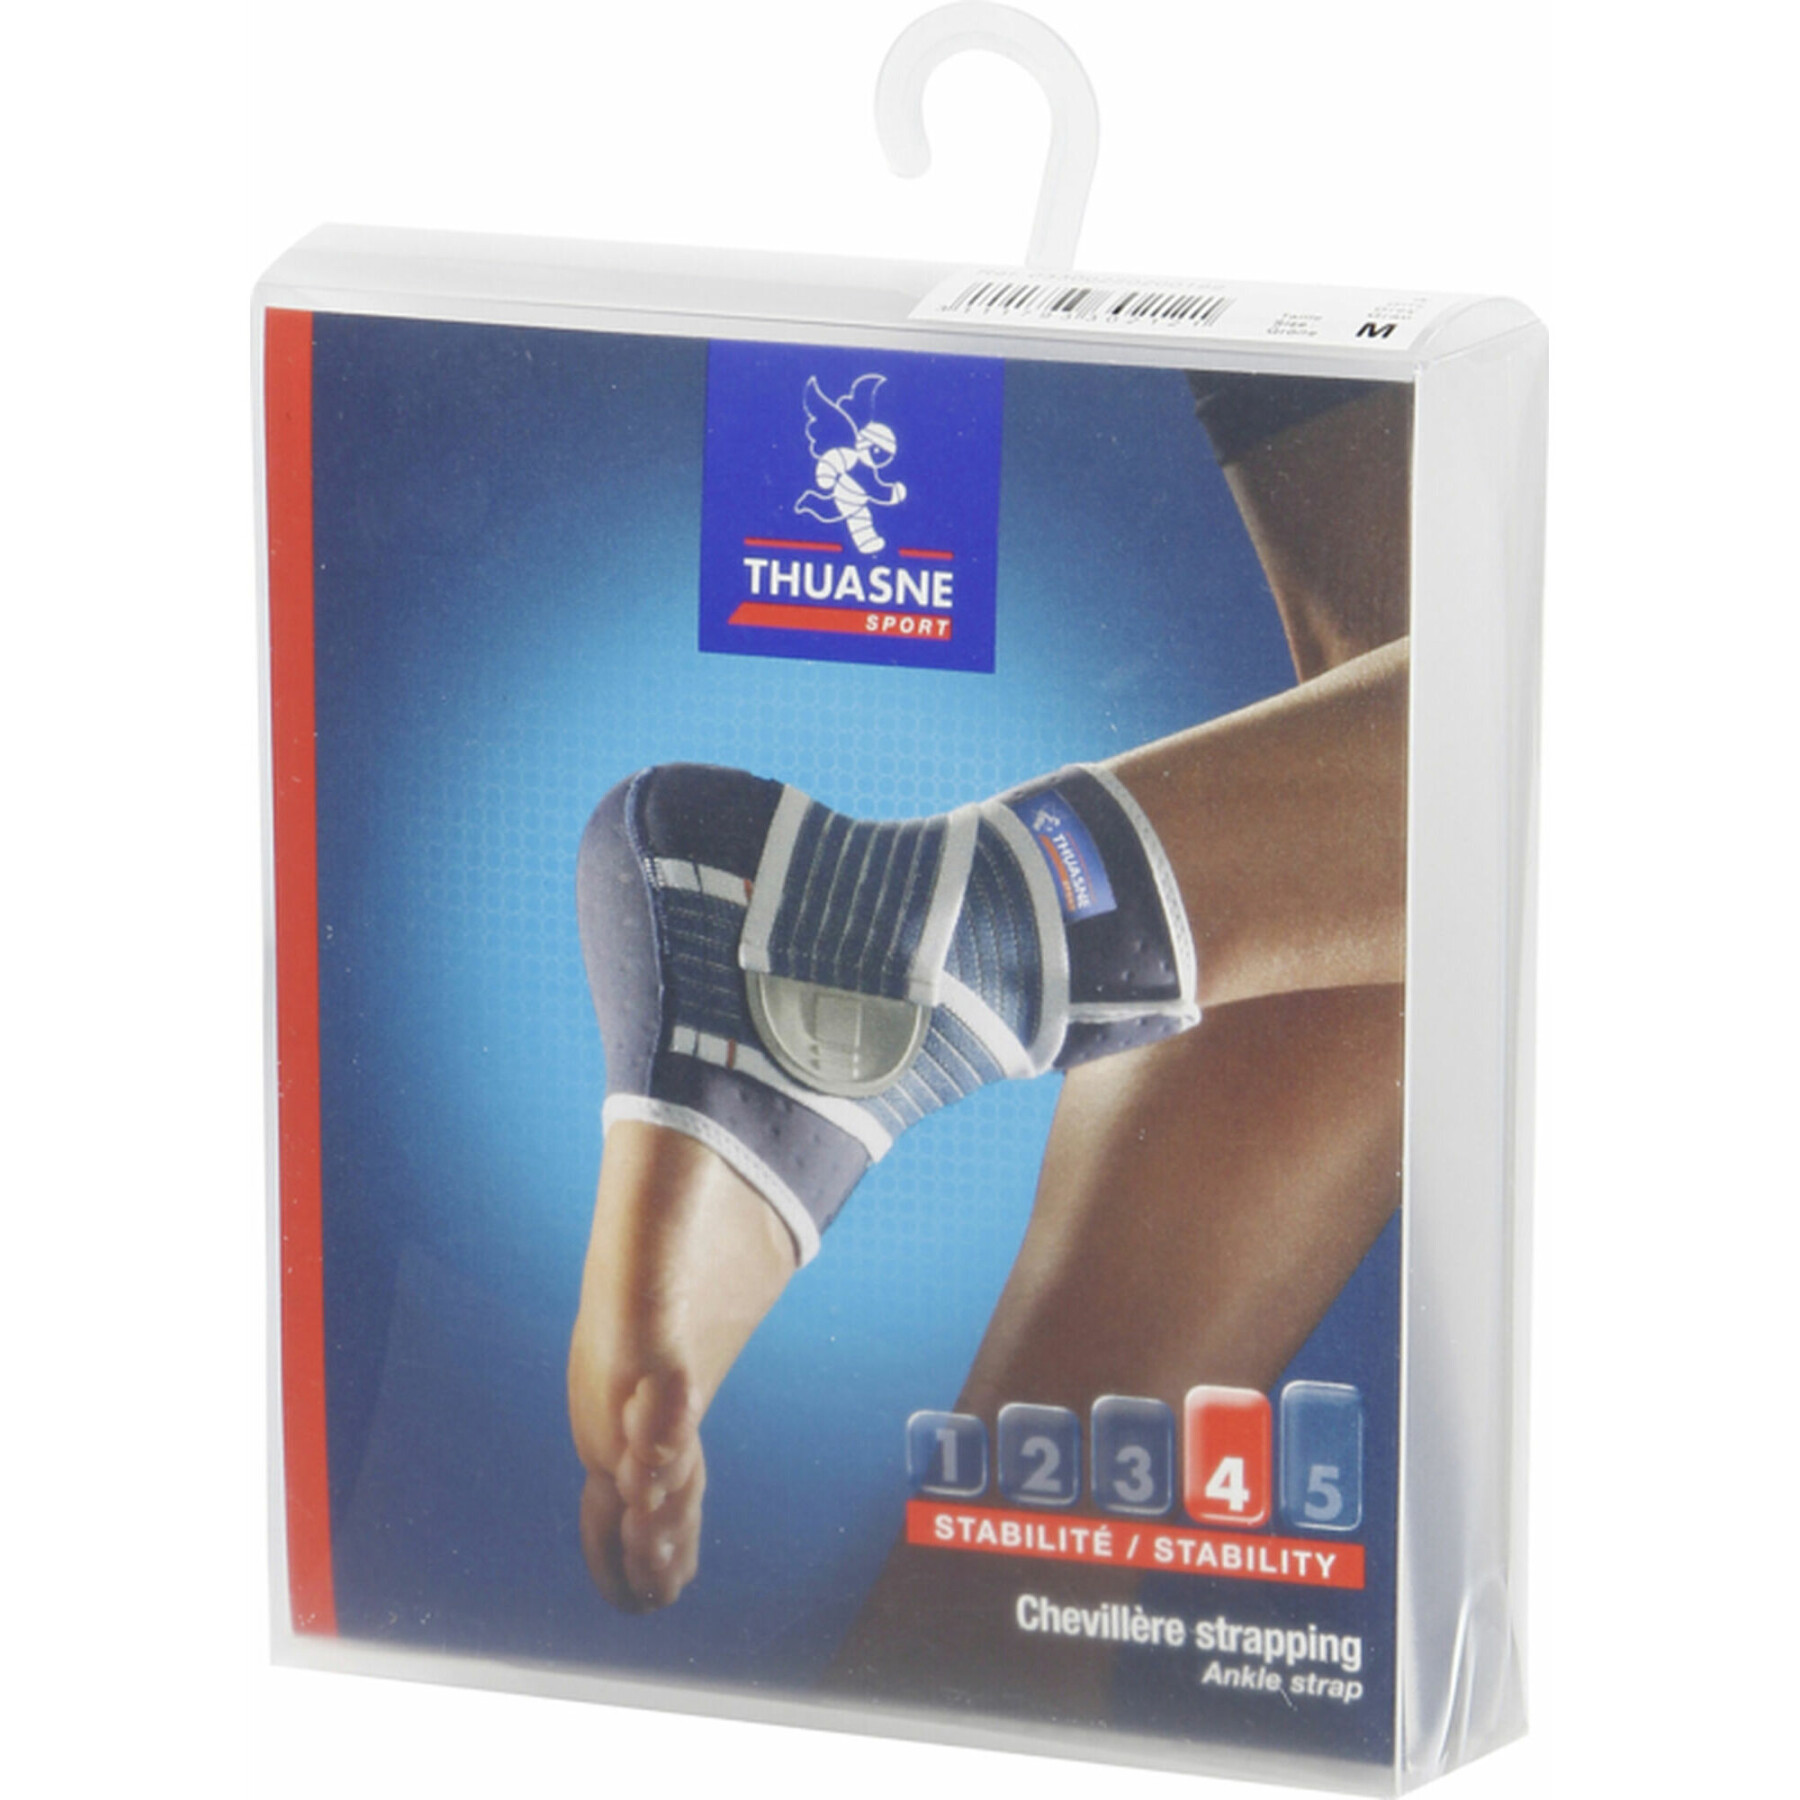 Ankle strapping from sport Thuasne Sport